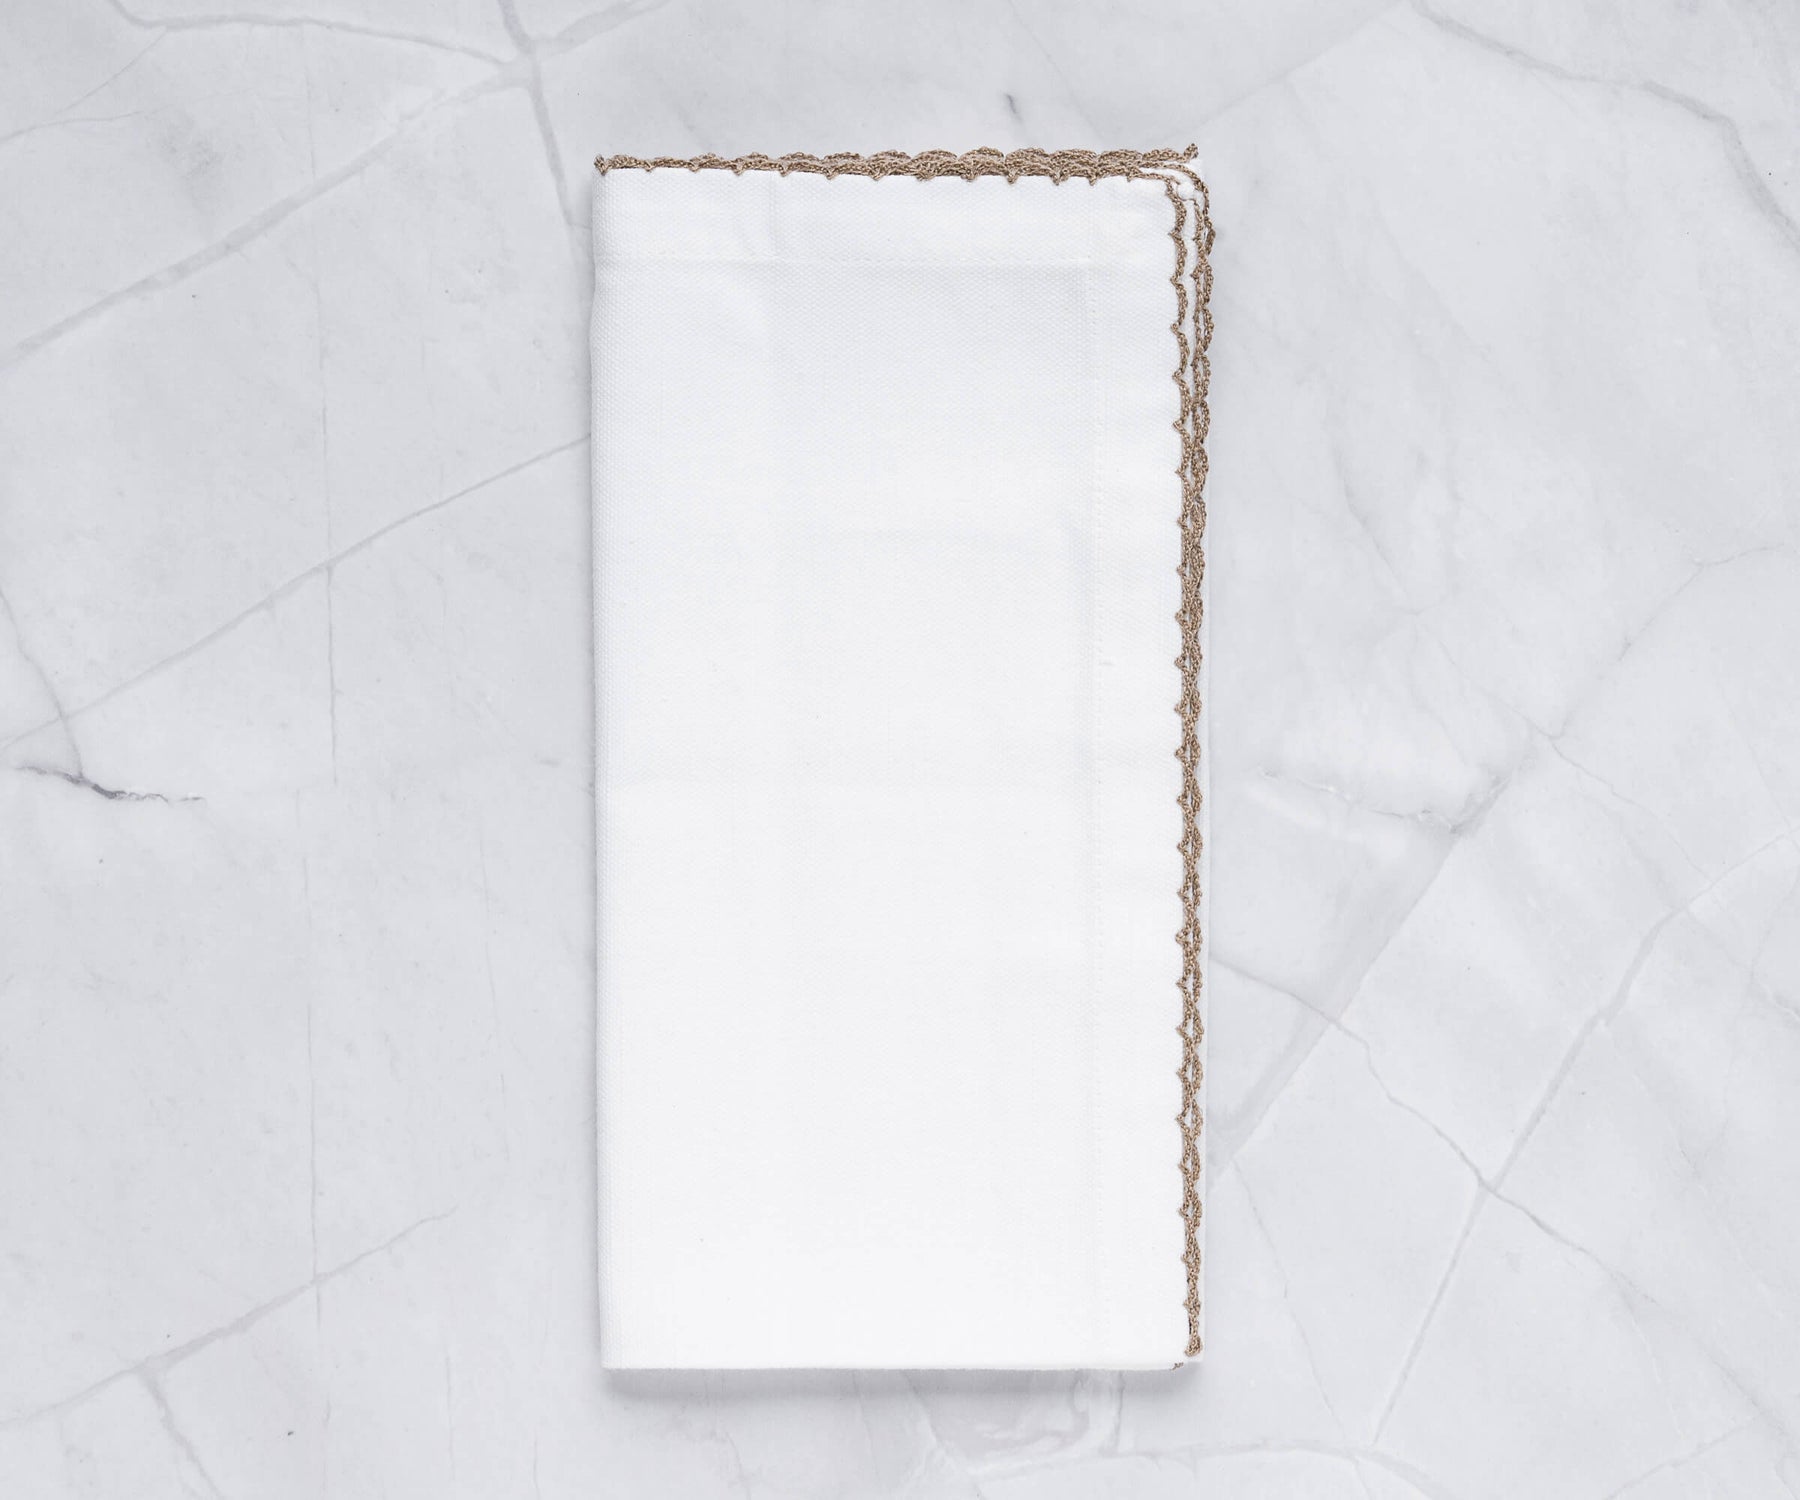 Luxurious shell edge napkin adorned with a gold trim